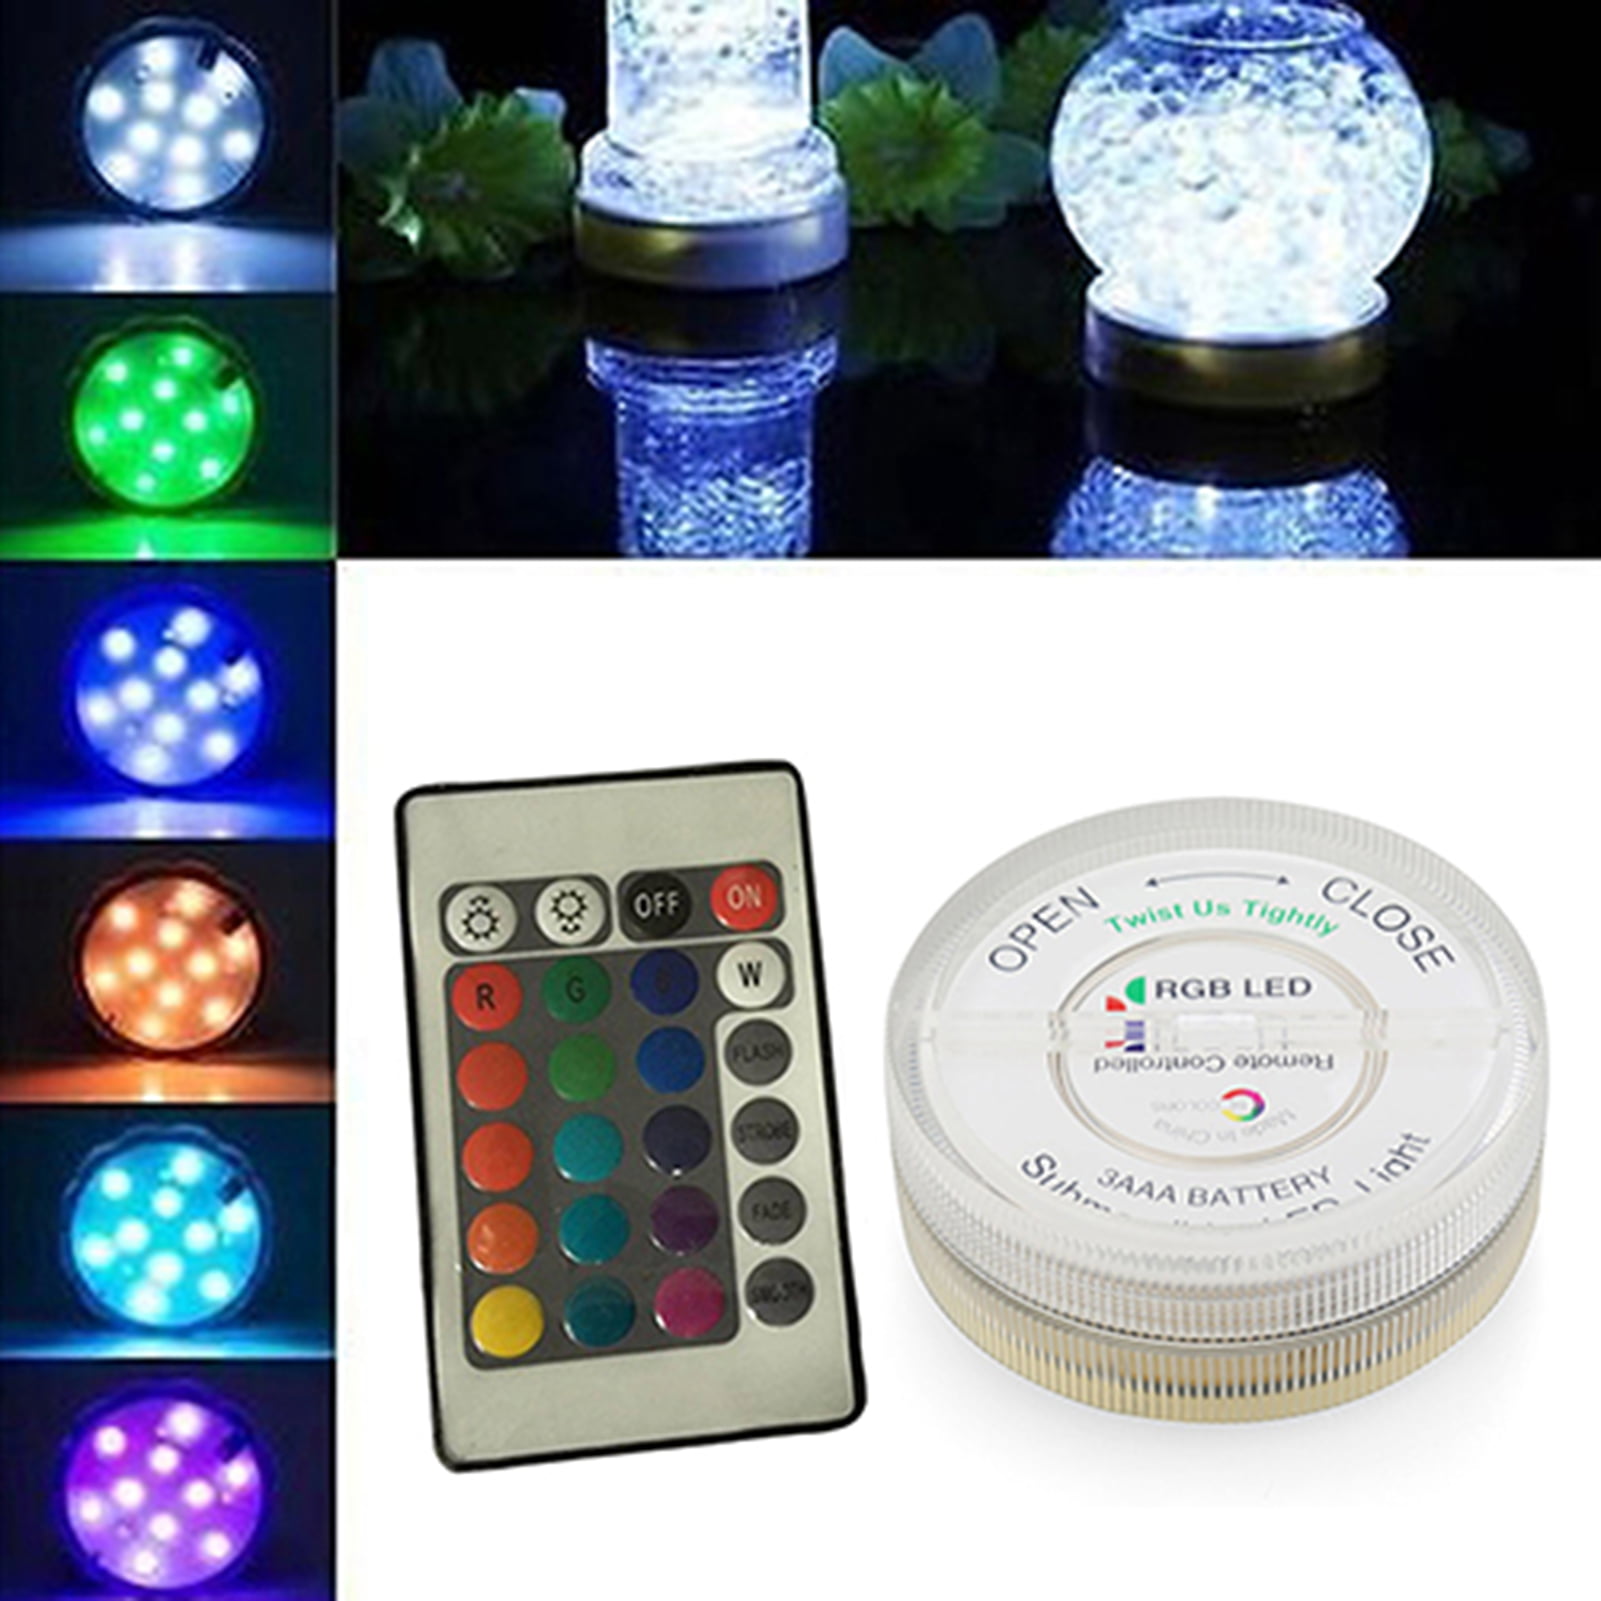 10pcs Small Waterproof Underwater LED Lights Color Changing LED Lights for Party Event Vase Fishtank Halloween Christmas Wedding Decoration SEEGO Mini Submersible Led Lights with Remote